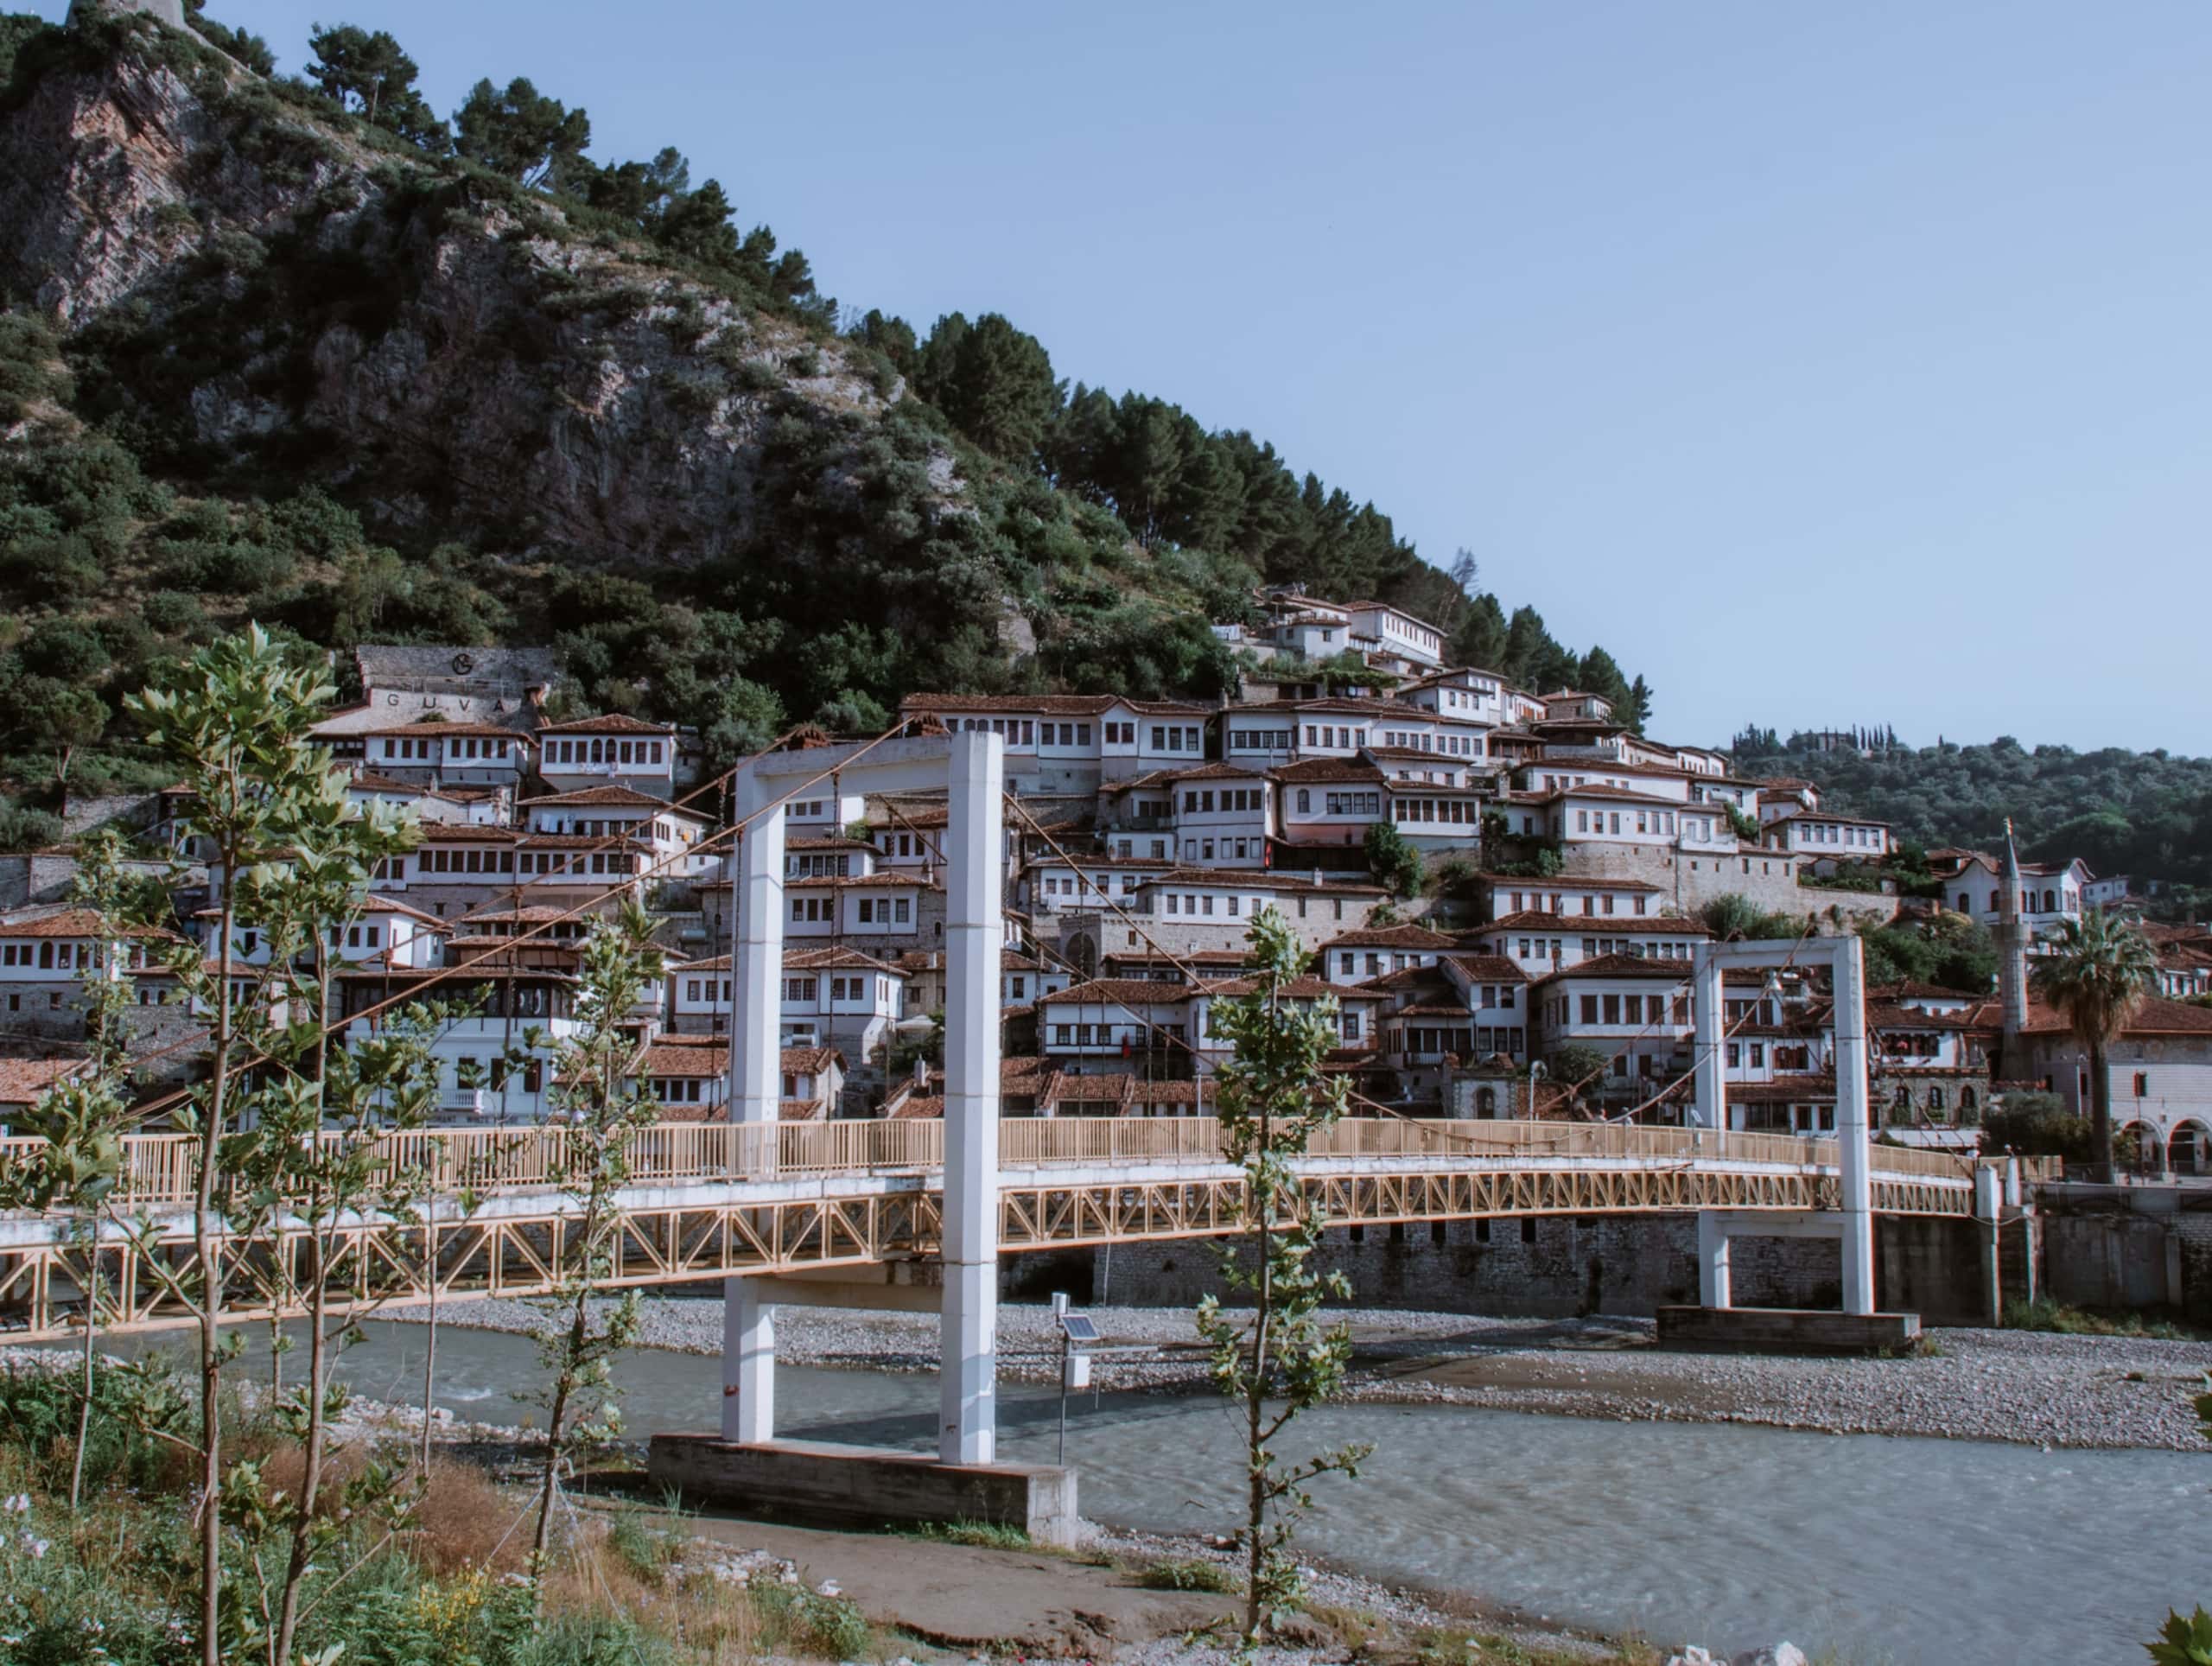 A photo showing a suspension bridge over a blue river in Berat with the Mangalem quarter seen behind. The buildings in the mangalem quarter all have orange roofs, white walls, and hundreds of rectangular windows can be seen. Behind the buildings is a hill leading up to the left, covered in green trees